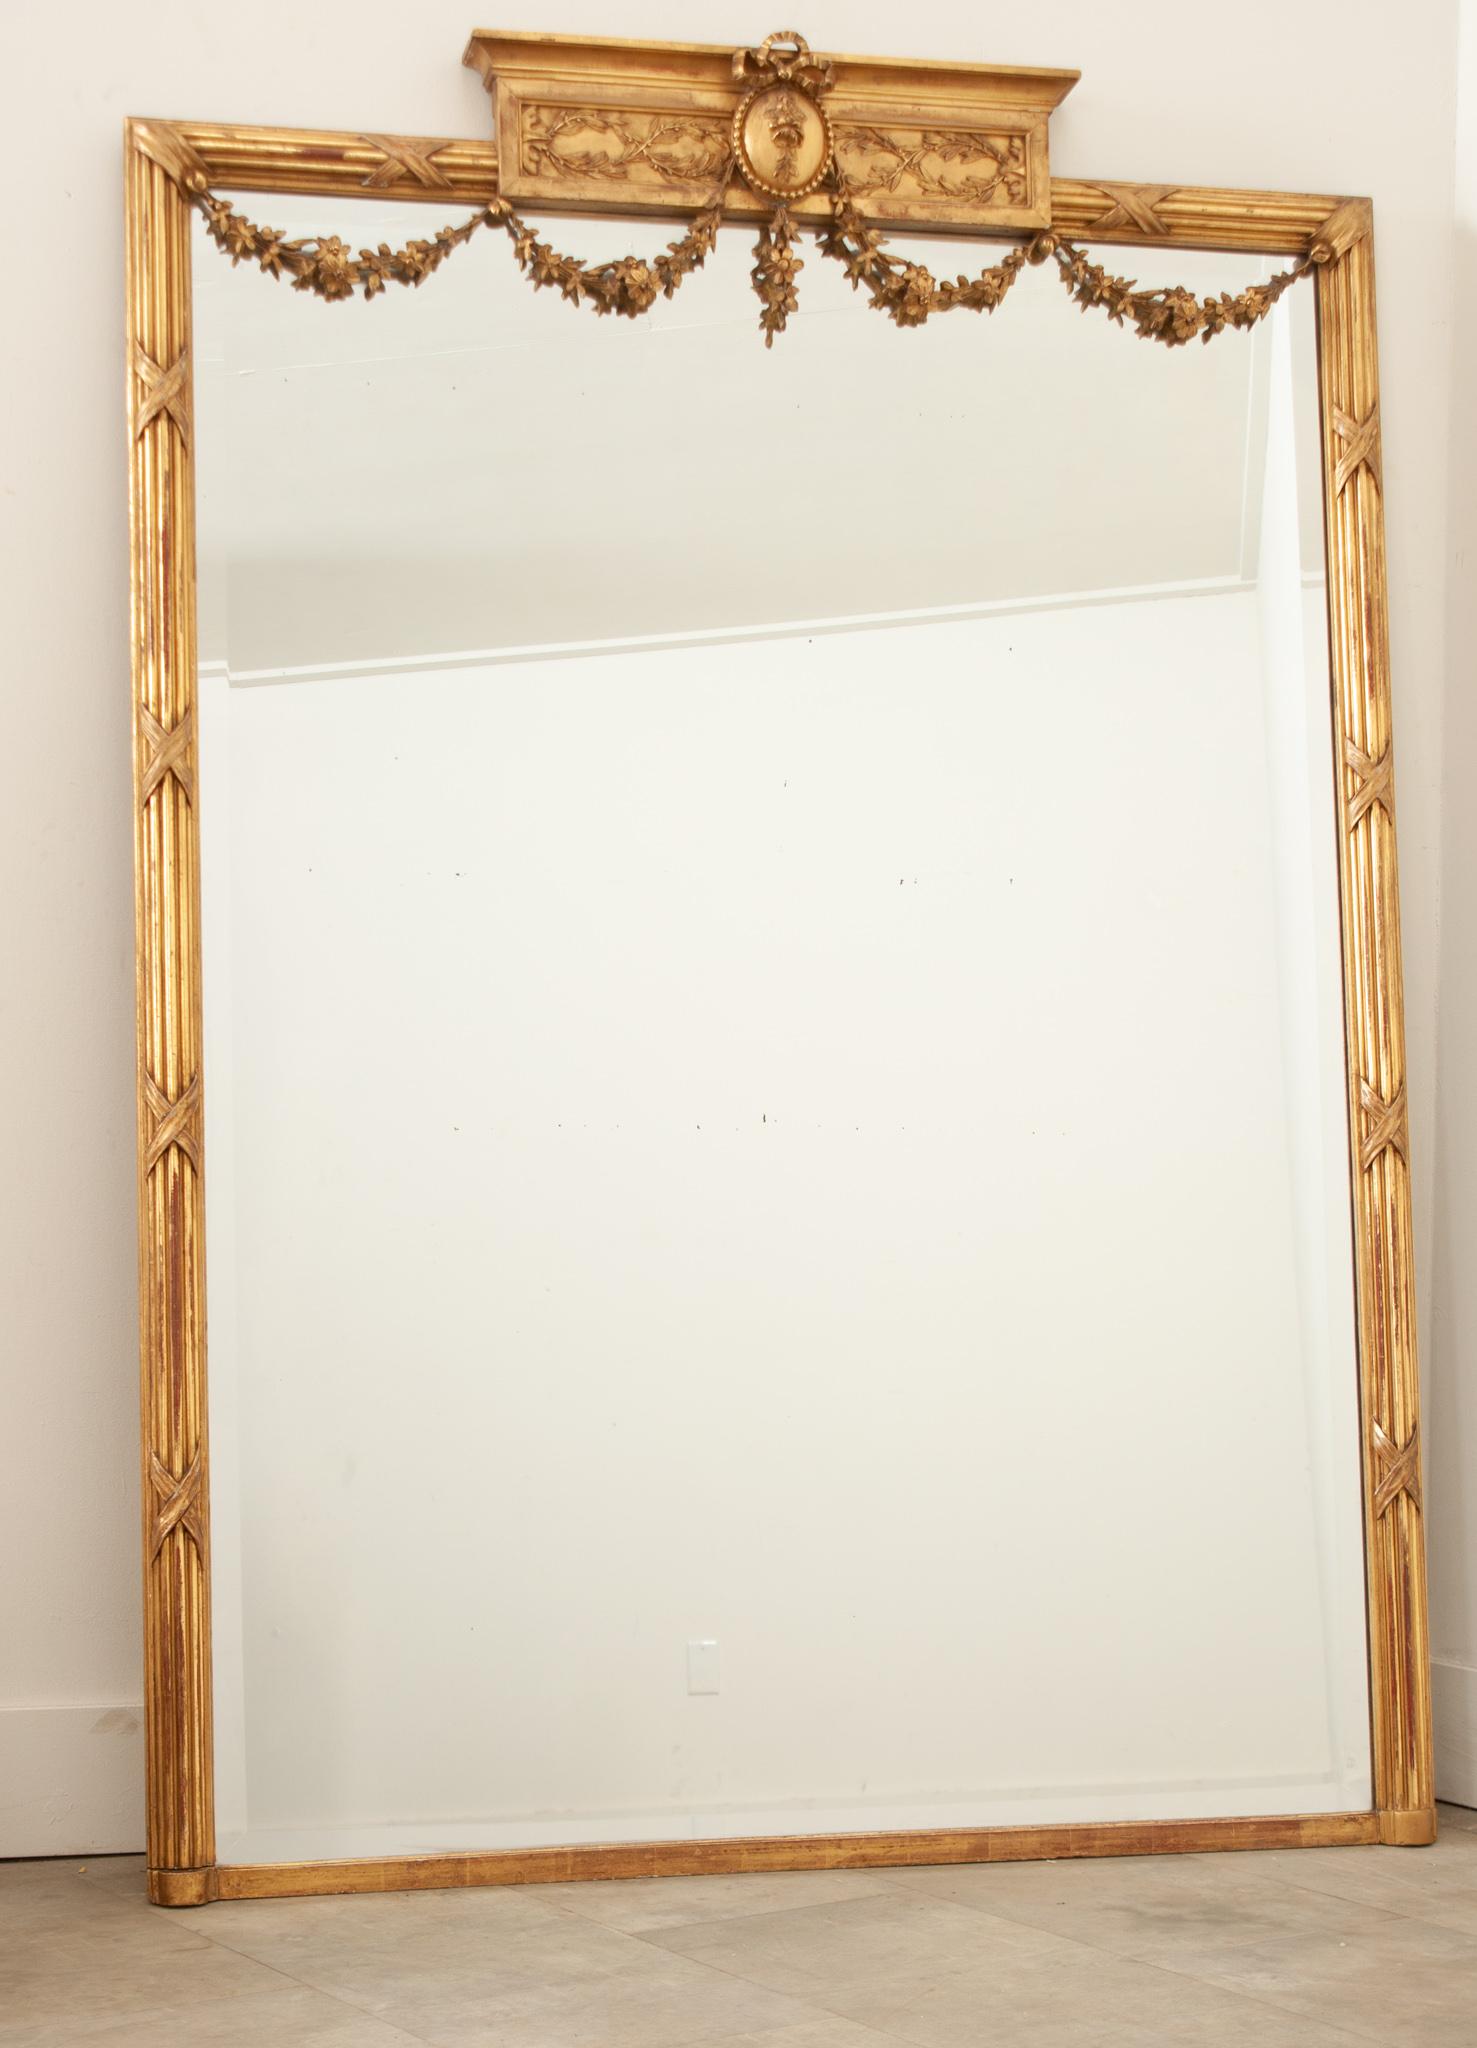 A gorgeous and regal Louis XVI style gold gilt mirror hand-crafted in France in the 19th century. This elegant mirror boasts the original mirror glass with a beautiful beveled edge. The hand-carved frame is topped with an ornately carved shaped